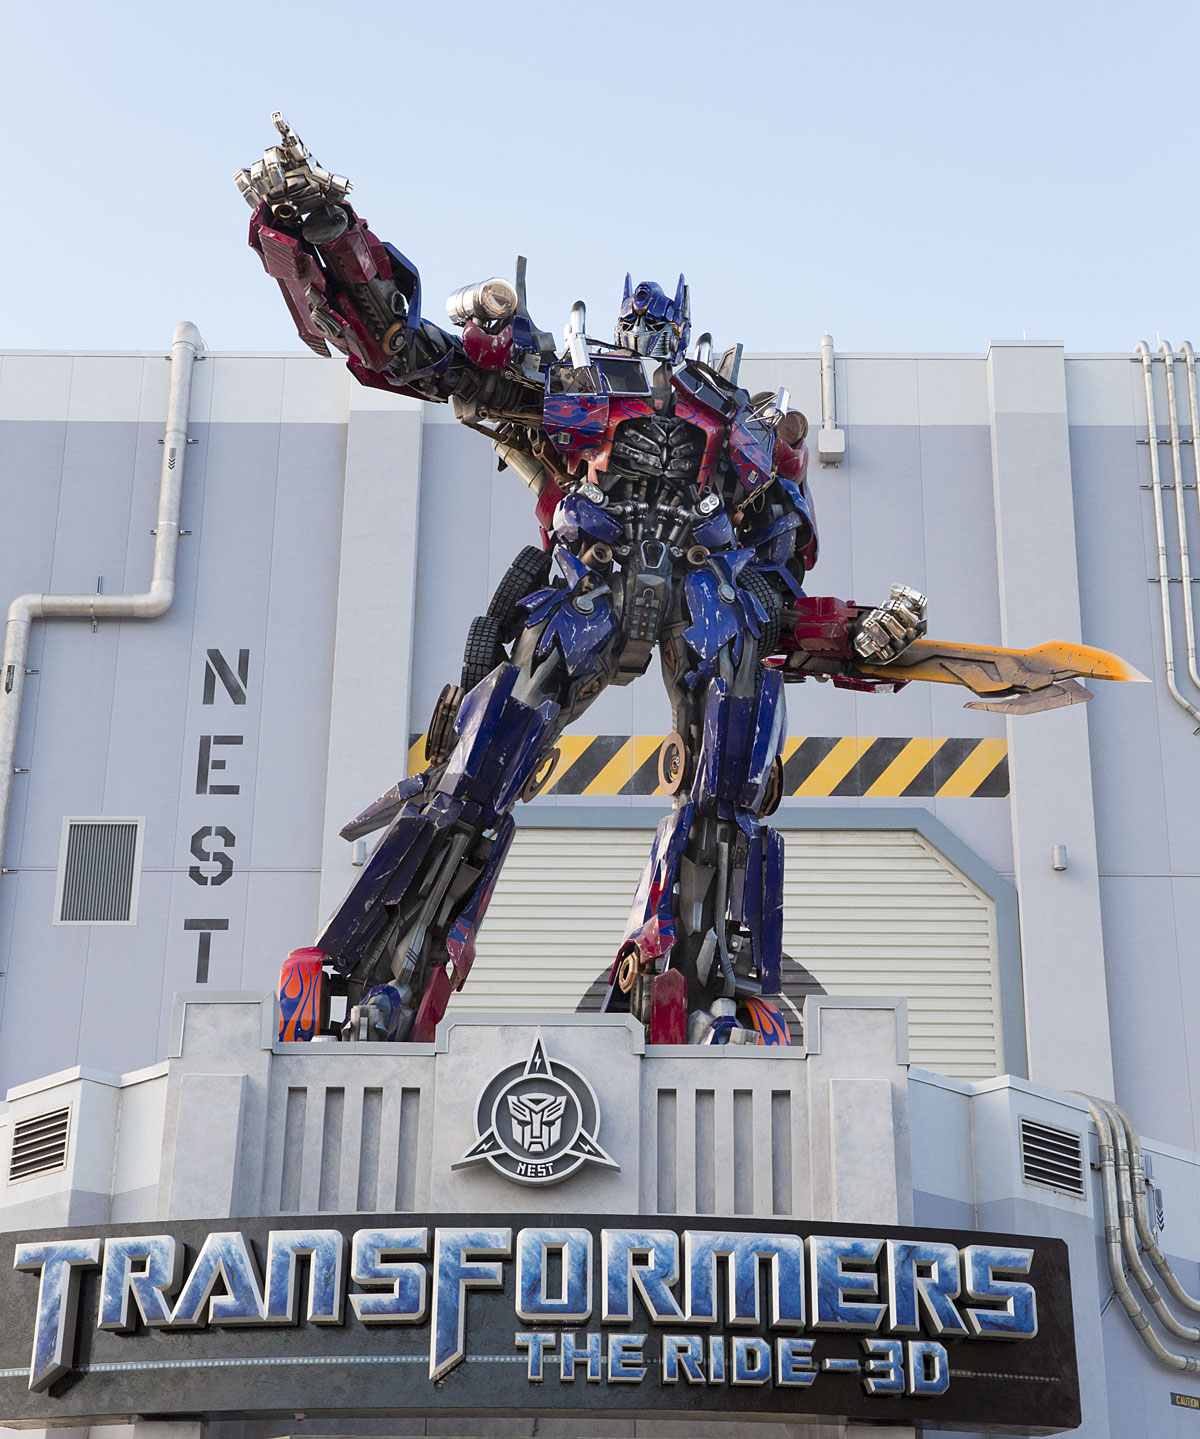 Transformers: The Ride - 3D now open at Universal Studios Florida